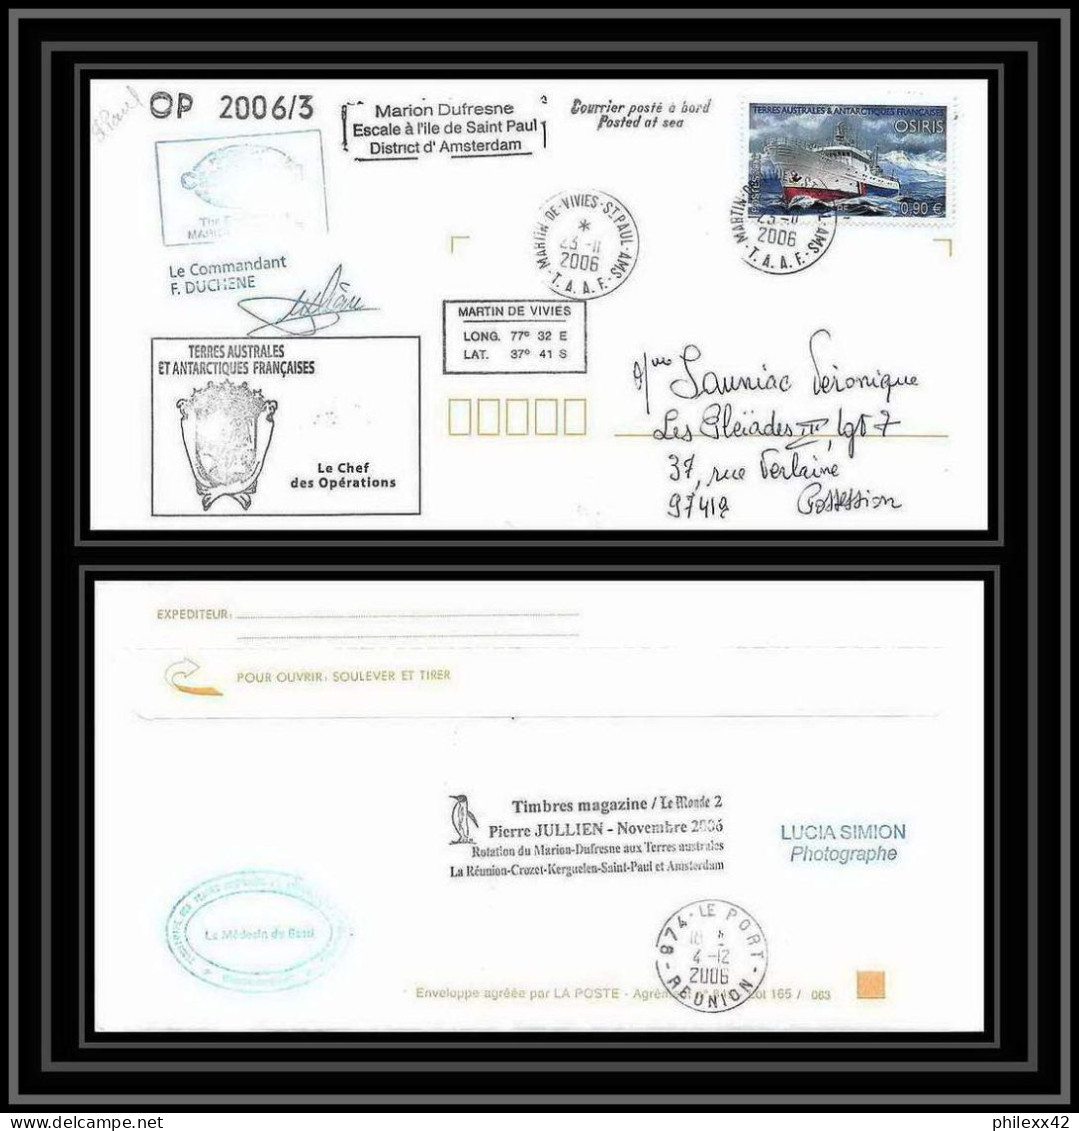 2618 ANTARCTIC Terres Australes TAAF Lettre Cover Dufresne 2 Signé Signed Op 2006/3 N°442 23/11/2006 St Paul - Antarctic Expeditions